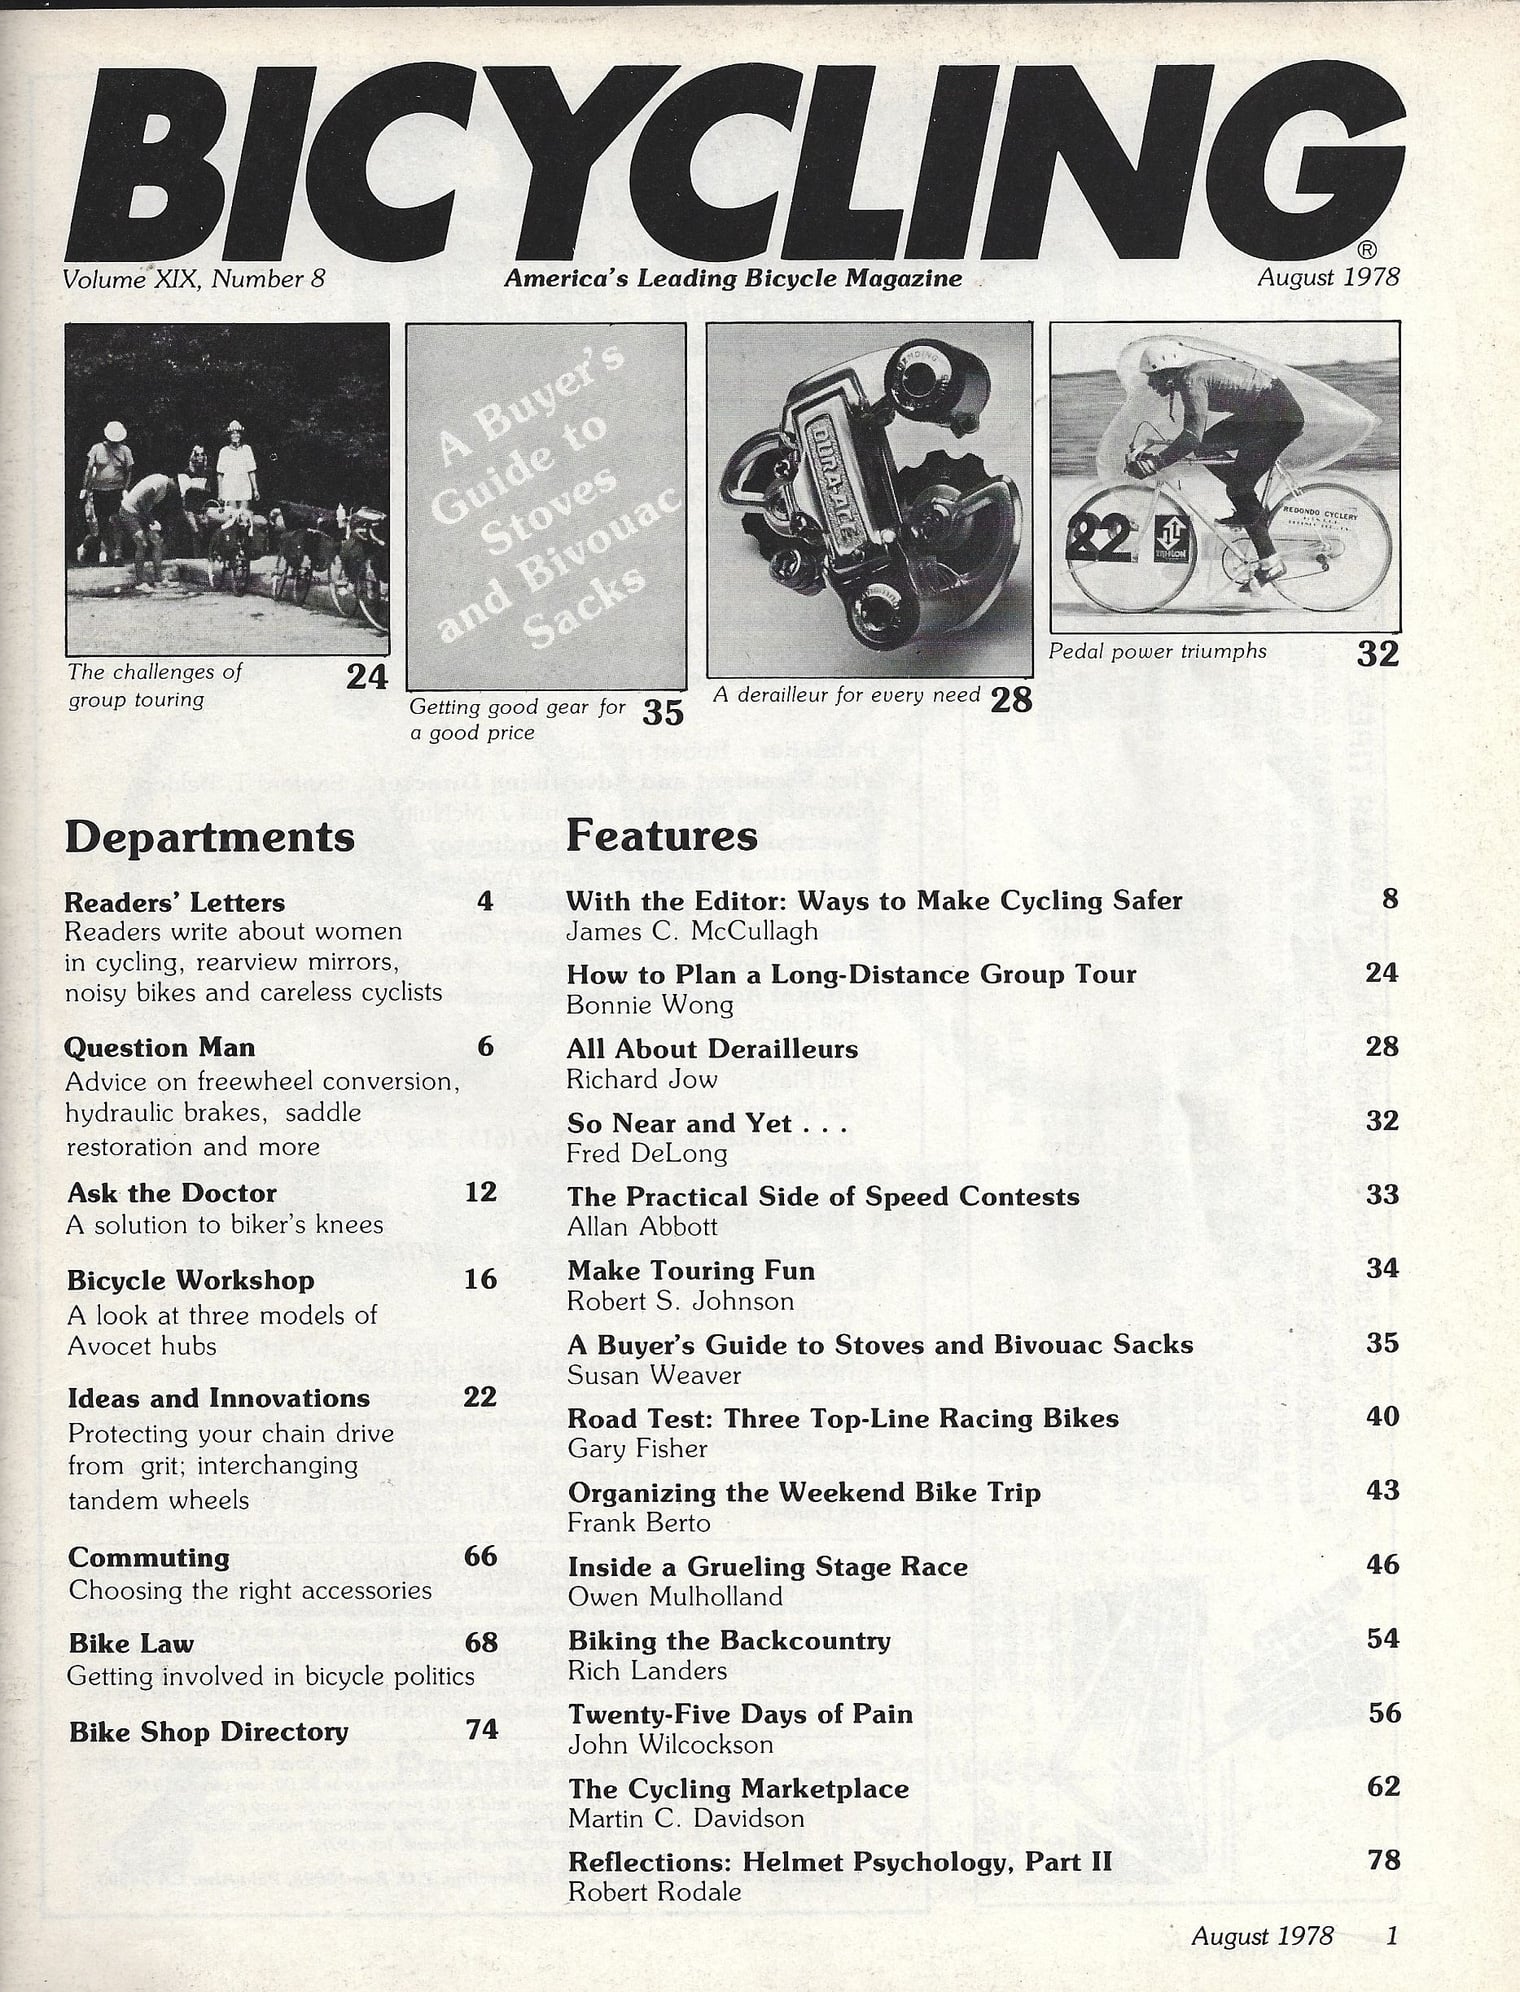 45 Years Ago: August 1978 in Bicycling magazine - Bike Forums